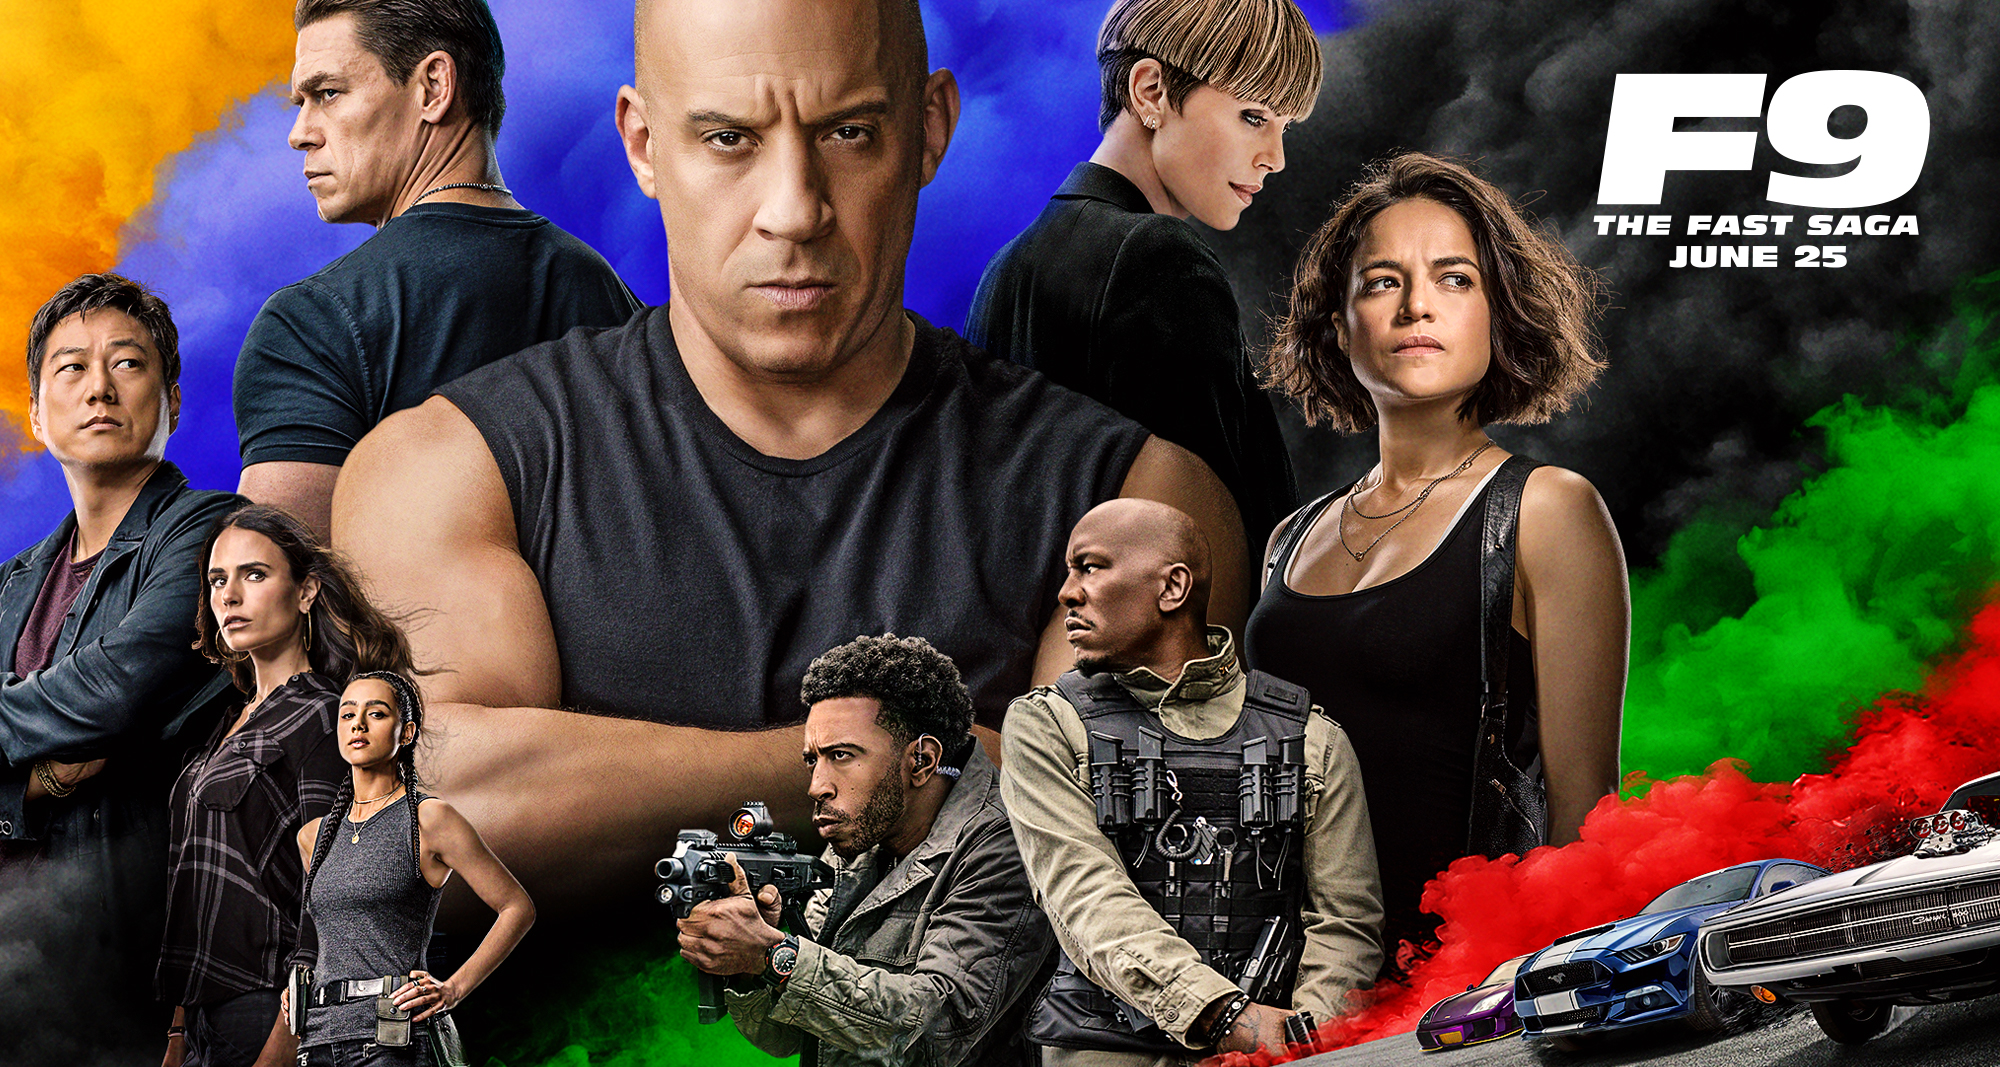 Ahead of F9, you can watch all previous Fast & Furious films for free in these select theatres